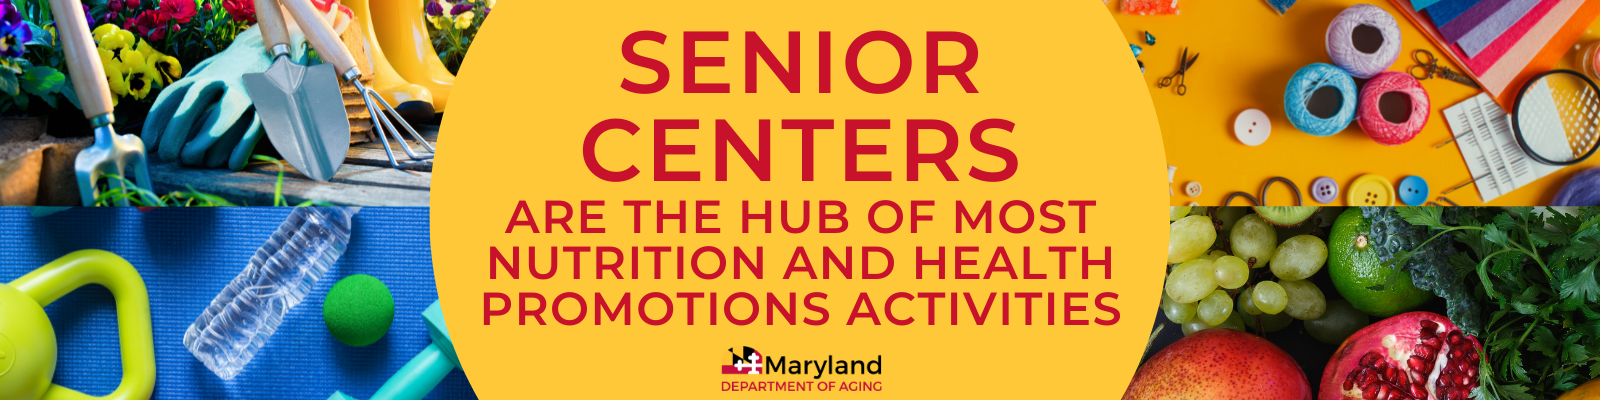 senior center banner. Image says: Senior Centers are the hub of most nutrition and health promotions activities.